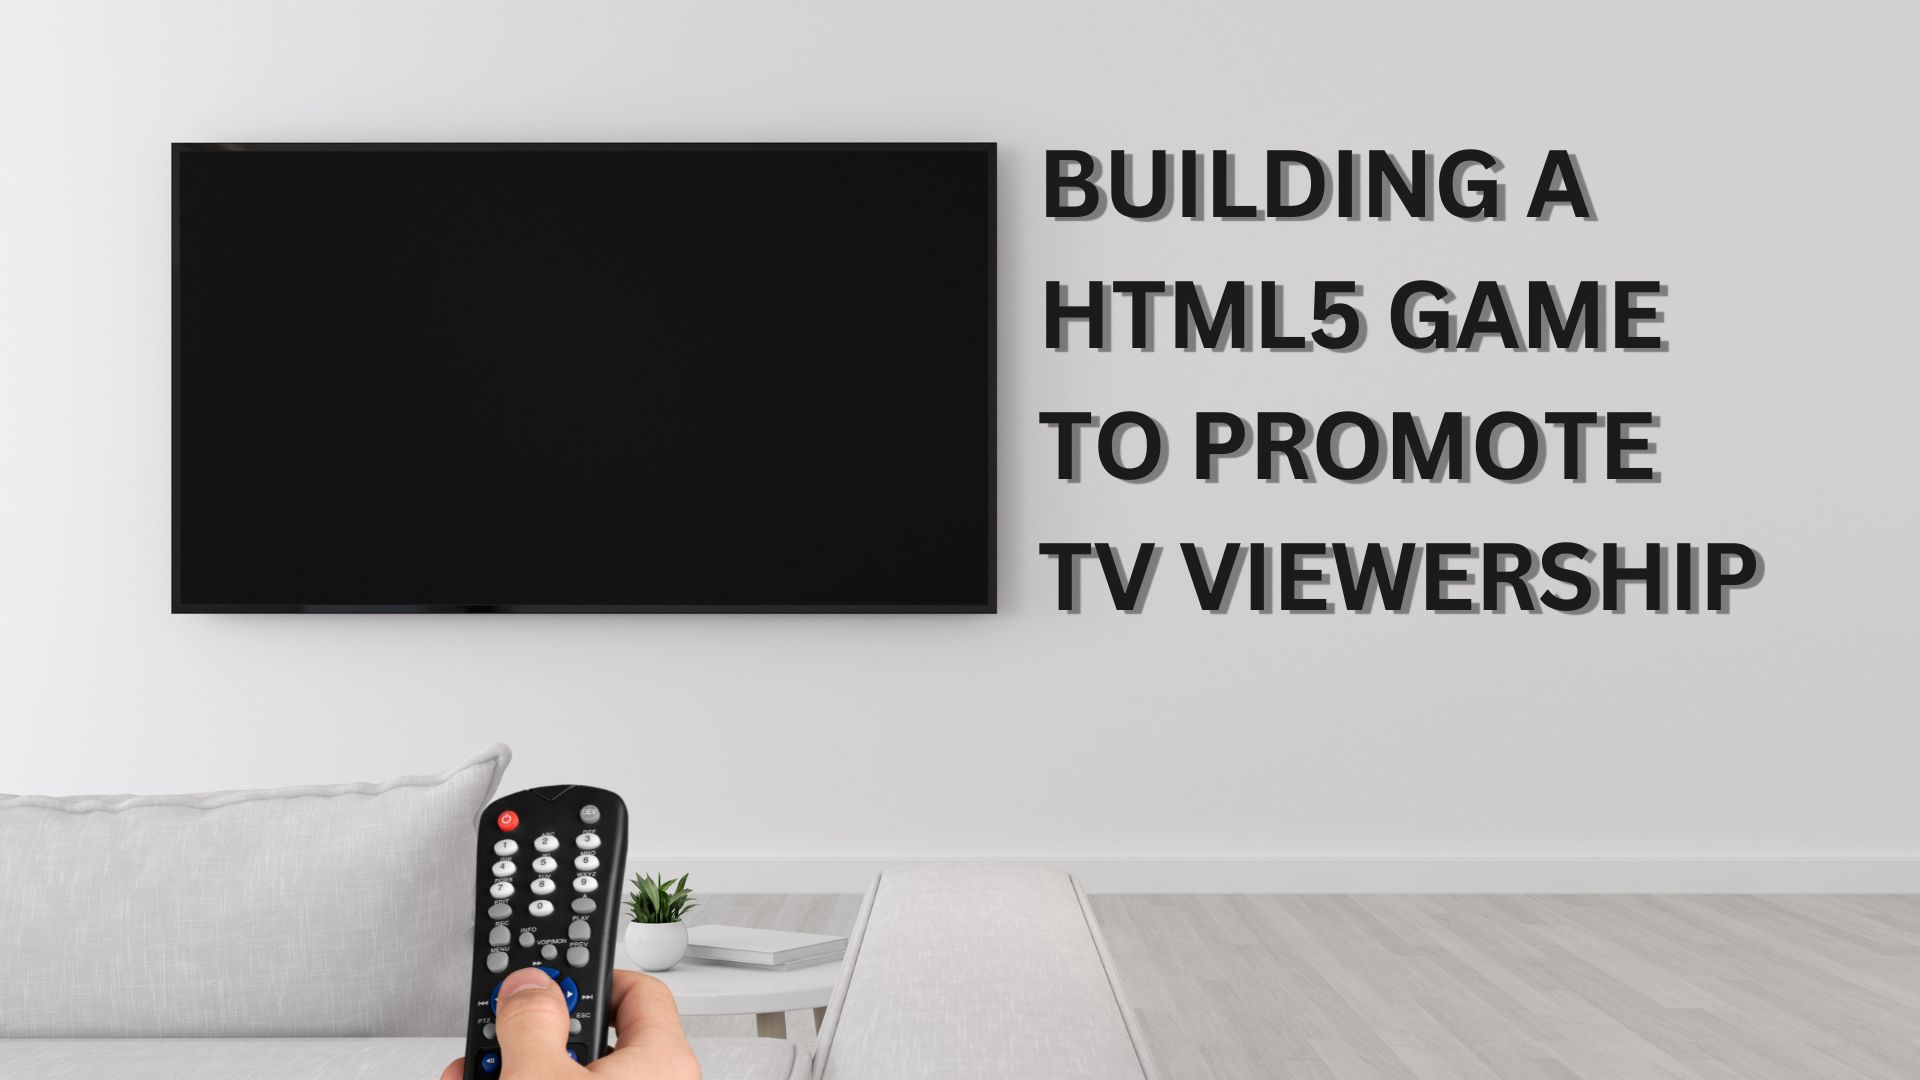 Building a HTML5 game to promote TV viewership